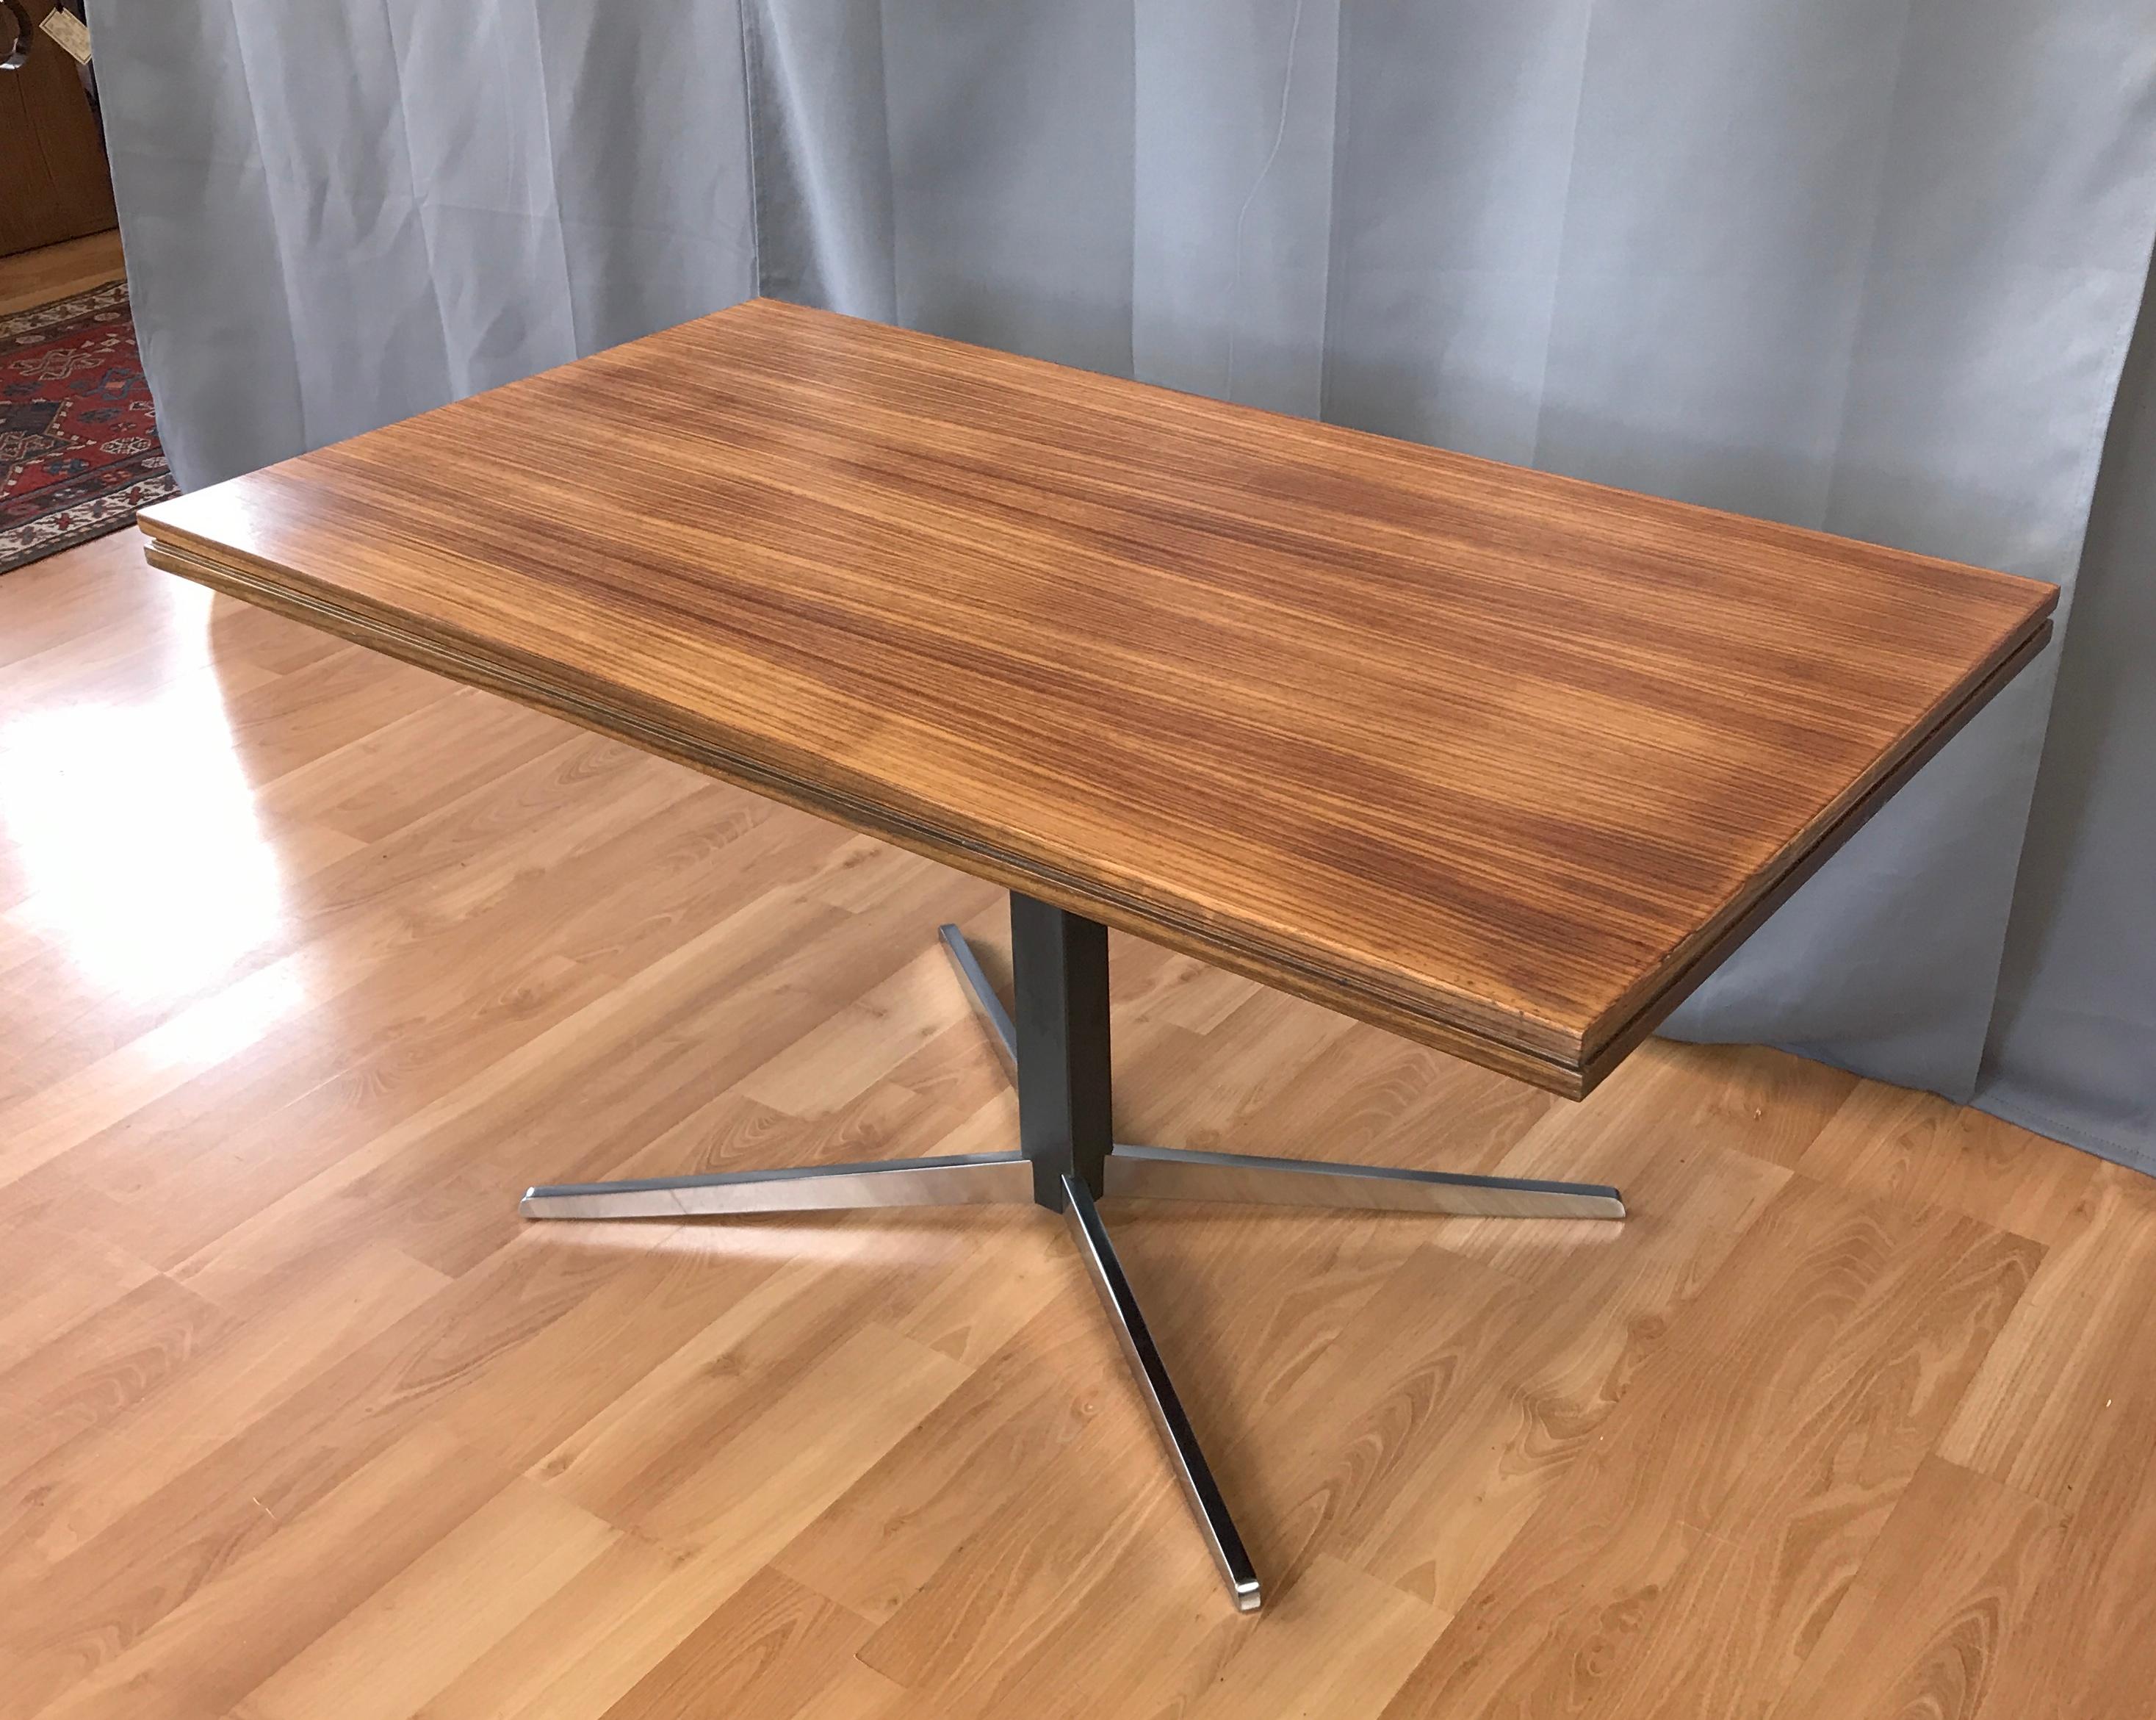 Offered here is a fantastic circa 1960s German made Rosewood table by Wilhelm Renz. 

This table goes from a coffee table height very easily to a dining table. 
Start off with coffee height, then with a little lift of the lever up it goes, pivot